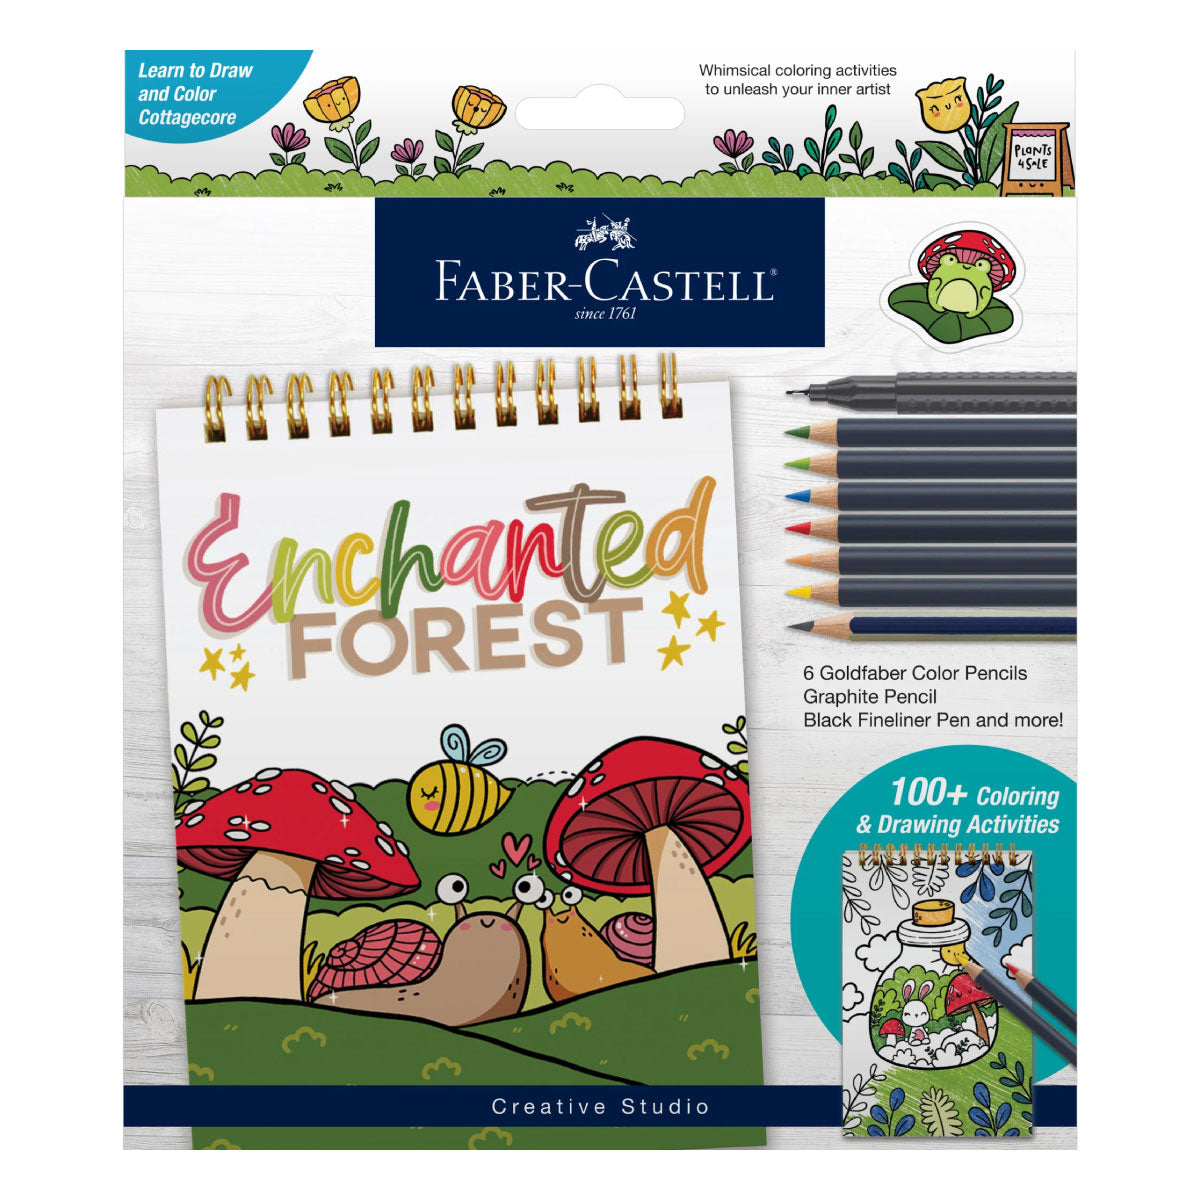 Faber Castell Creative Studio Enchanted Forest Drawing Kit